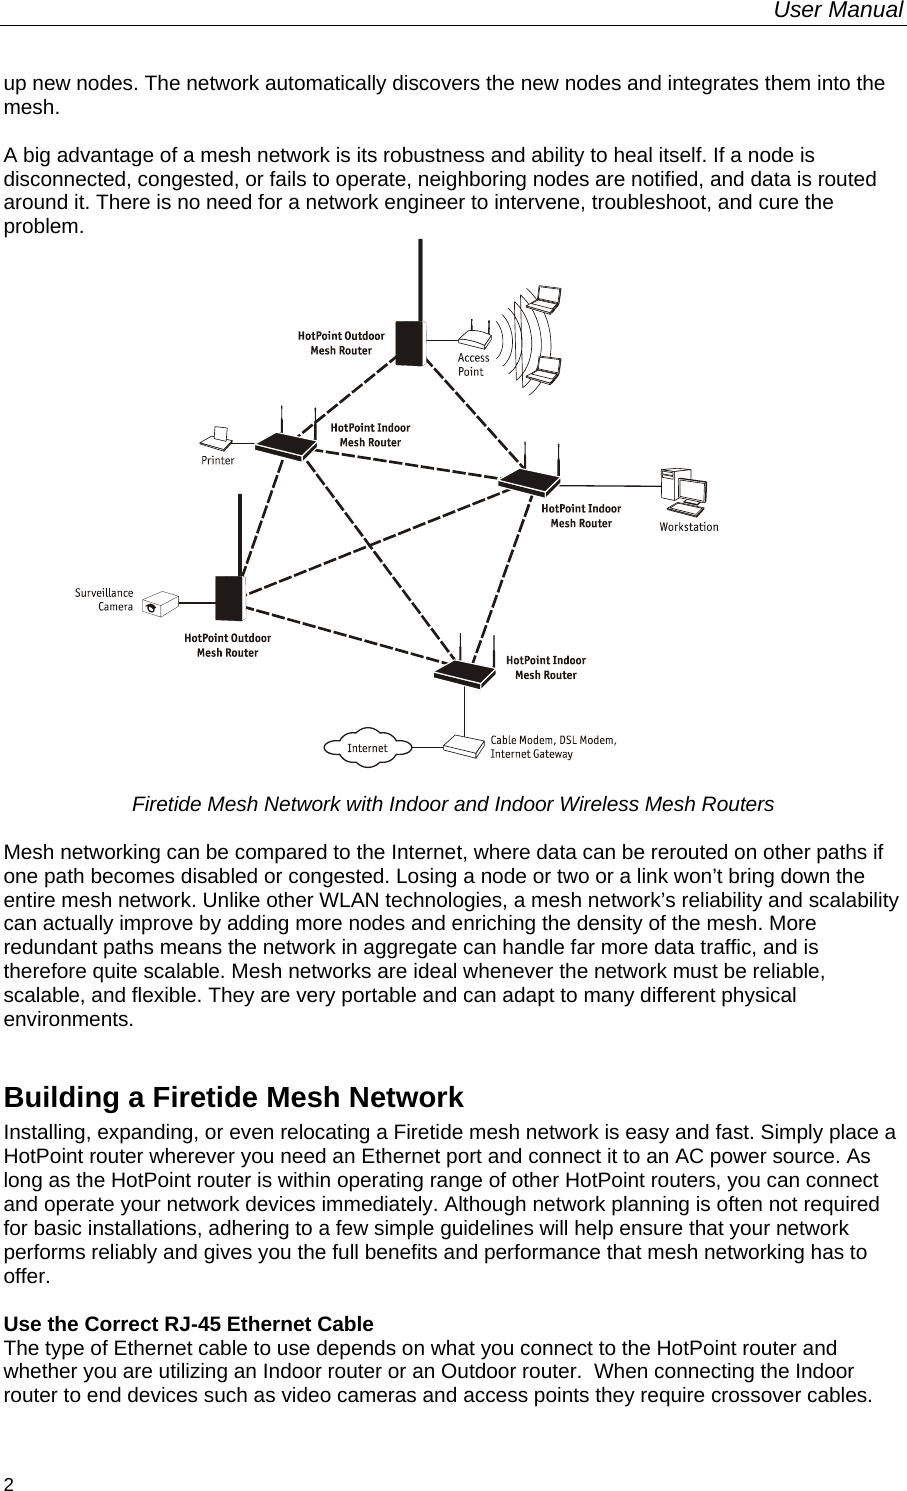 User Manual  2 up new nodes. The network automatically discovers the new nodes and integrates them into the mesh.  A big advantage of a mesh network is its robustness and ability to heal itself. If a node is disconnected, congested, or fails to operate, neighboring nodes are notified, and data is routed around it. There is no need for a network engineer to intervene, troubleshoot, and cure the problem.   Firetide Mesh Network with Indoor and Indoor Wireless Mesh Routers  Mesh networking can be compared to the Internet, where data can be rerouted on other paths if one path becomes disabled or congested. Losing a node or two or a link won’t bring down the entire mesh network. Unlike other WLAN technologies, a mesh network’s reliability and scalability can actually improve by adding more nodes and enriching the density of the mesh. More redundant paths means the network in aggregate can handle far more data traffic, and is therefore quite scalable. Mesh networks are ideal whenever the network must be reliable, scalable, and flexible. They are very portable and can adapt to many different physical environments.  Building a Firetide Mesh Network Installing, expanding, or even relocating a Firetide mesh network is easy and fast. Simply place a HotPoint router wherever you need an Ethernet port and connect it to an AC power source. As long as the HotPoint router is within operating range of other HotPoint routers, you can connect and operate your network devices immediately. Although network planning is often not required for basic installations, adhering to a few simple guidelines will help ensure that your network performs reliably and gives you the full benefits and performance that mesh networking has to offer.  Use the Correct RJ-45 Ethernet Cable The type of Ethernet cable to use depends on what you connect to the HotPoint router and whether you are utilizing an Indoor router or an Outdoor router.  When connecting the Indoor router to end devices such as video cameras and access points they require crossover cables. 